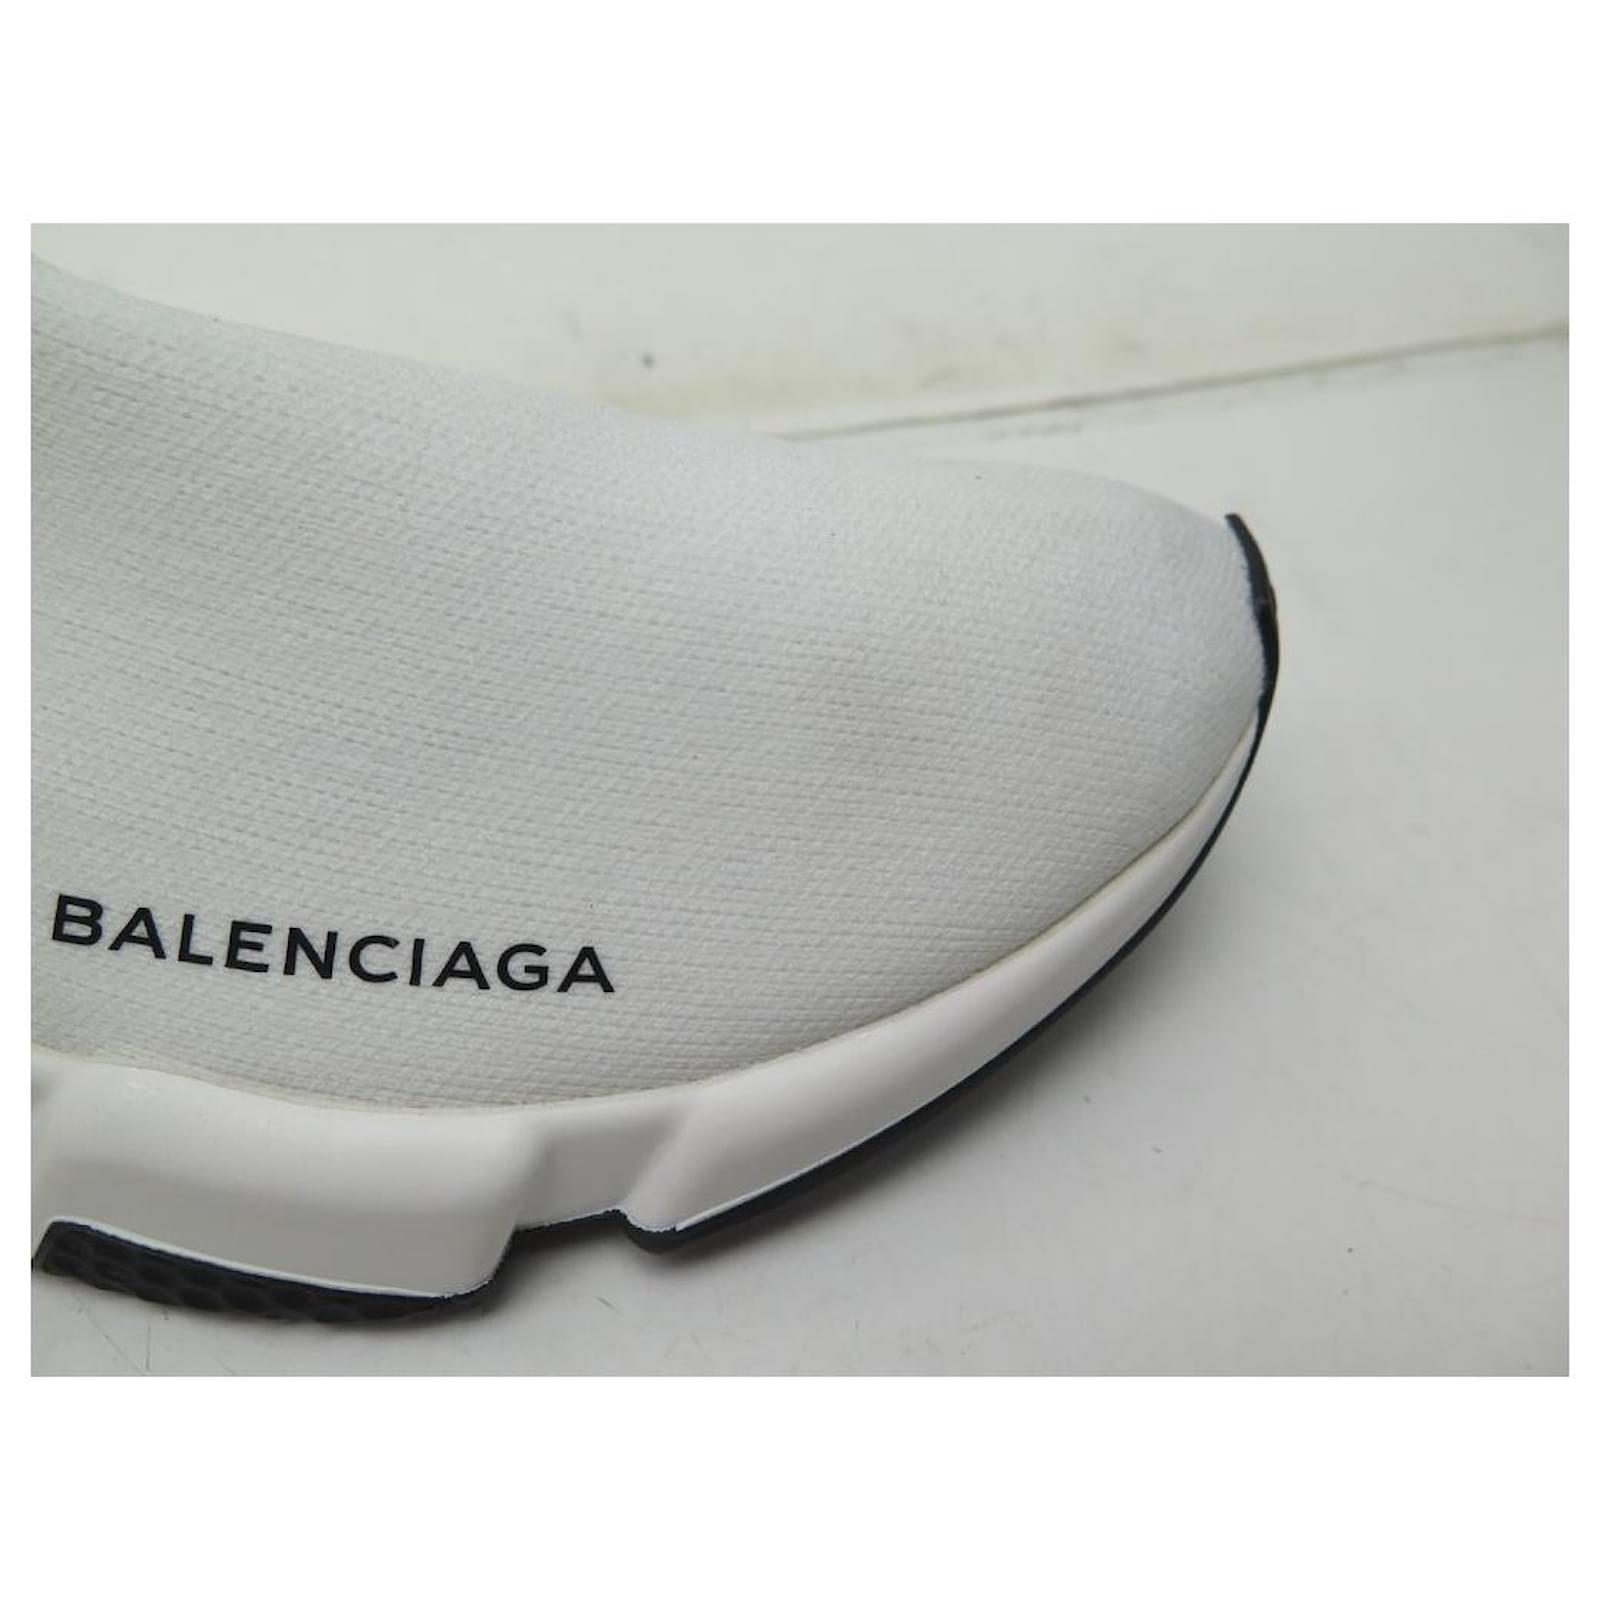 NEW BALENCIAGA SPEED TRAINER WHITE SHOES 41 494371 SNEAKERS SHOES Cloth  ref.881516 - Joli Closet